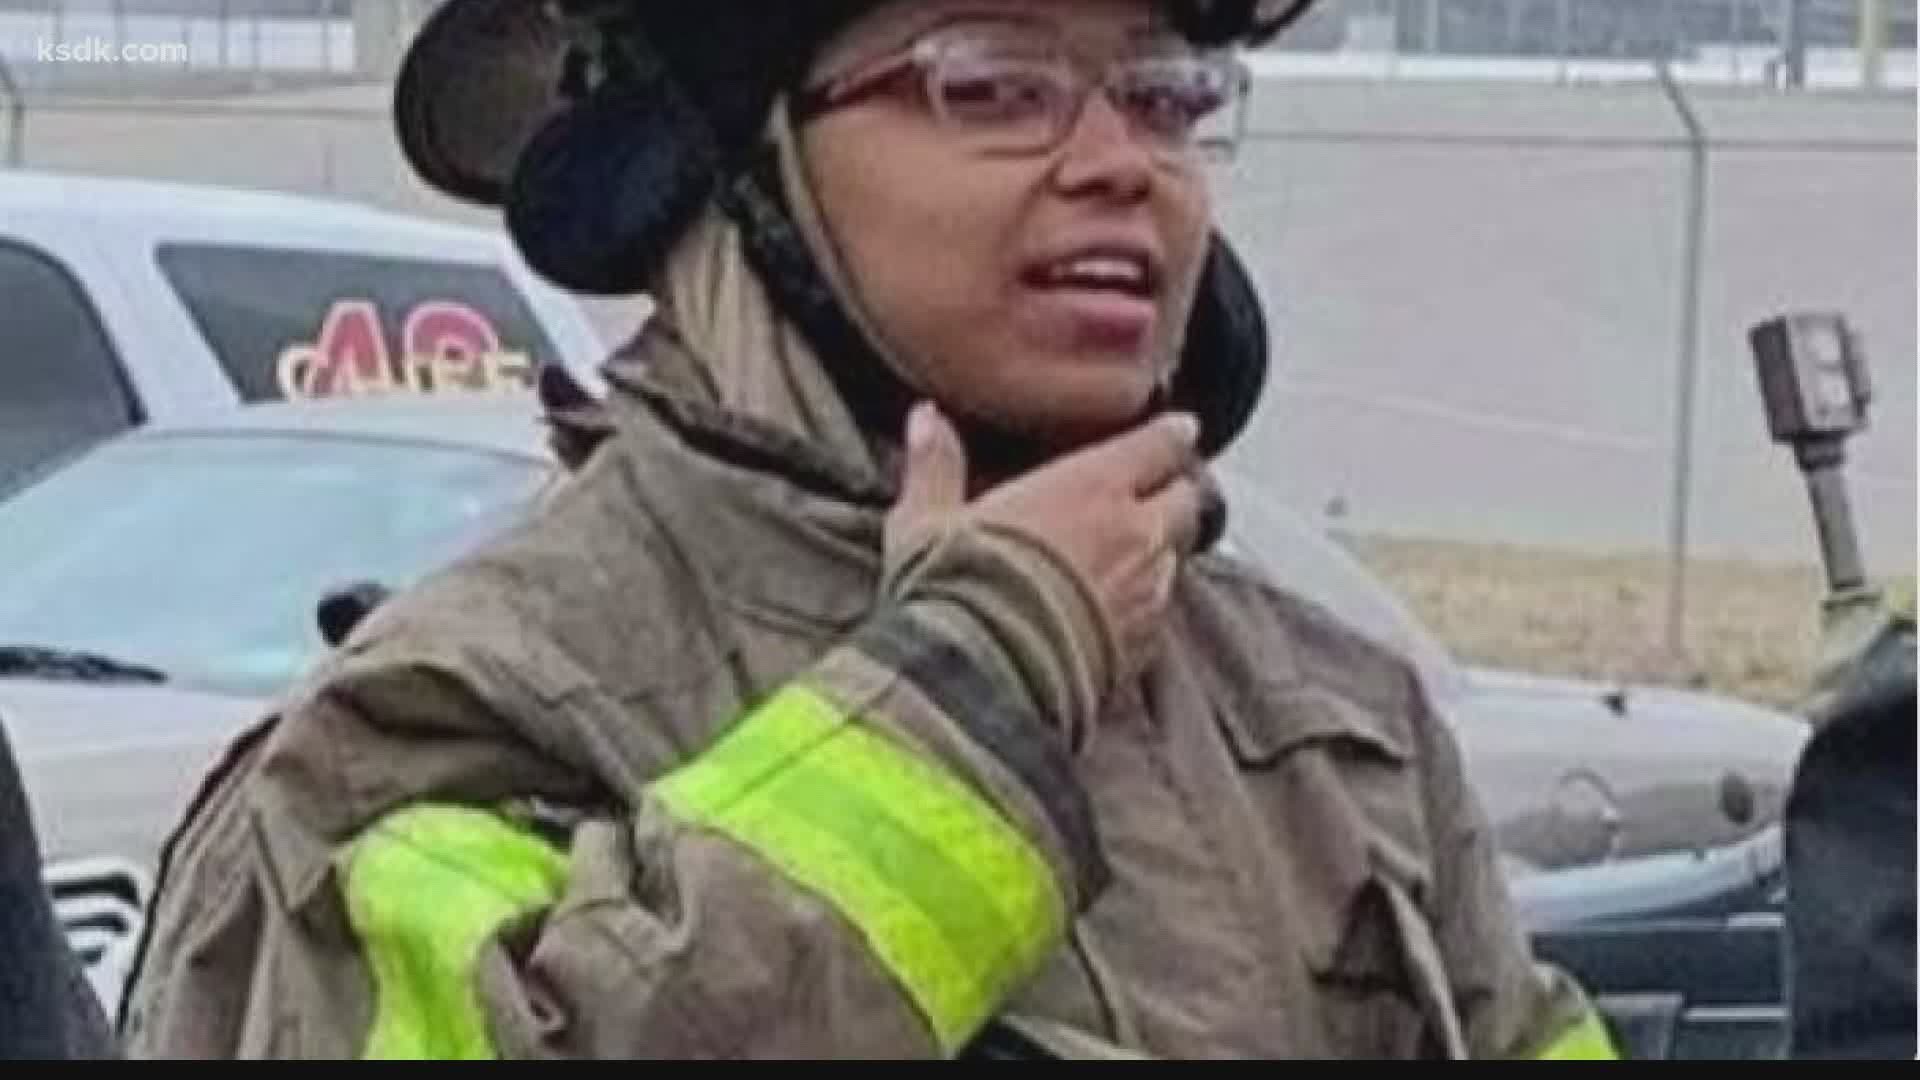 Arlydia Bufford is a 20-year-old firefighter with the Kinloch Fire Protection District. She remains in critical condition